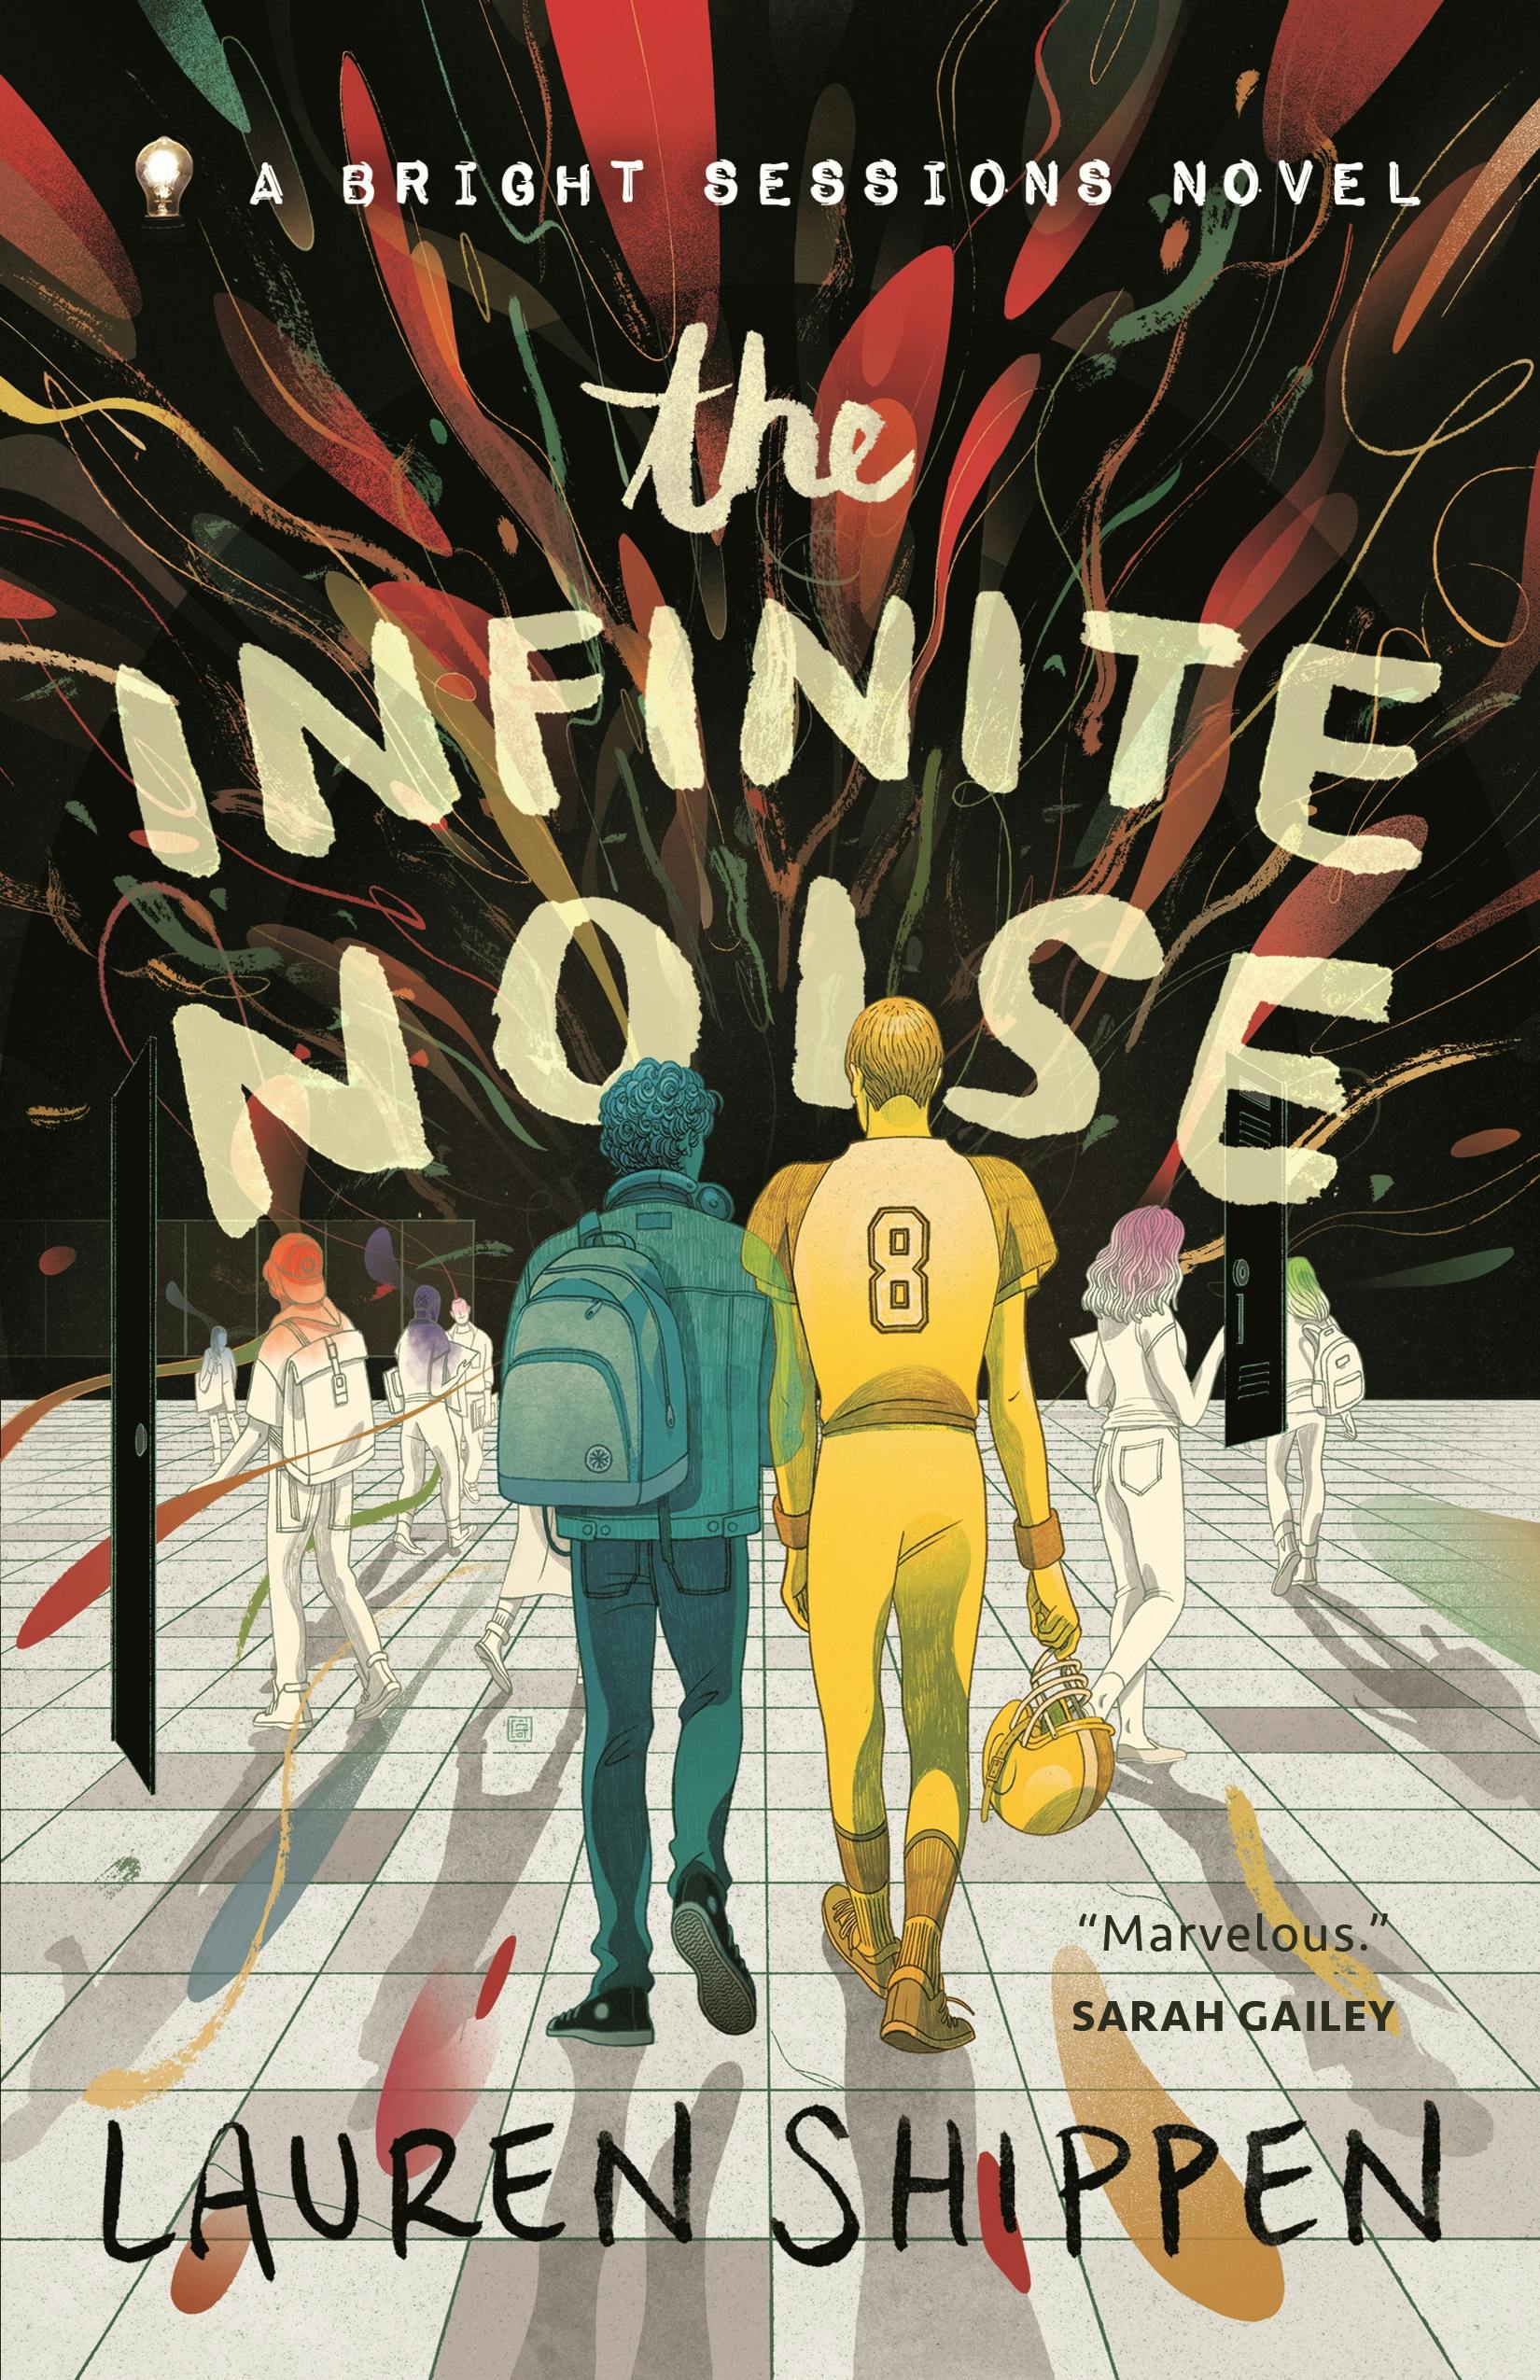 Cover for the book titled as: The Infinite Noise